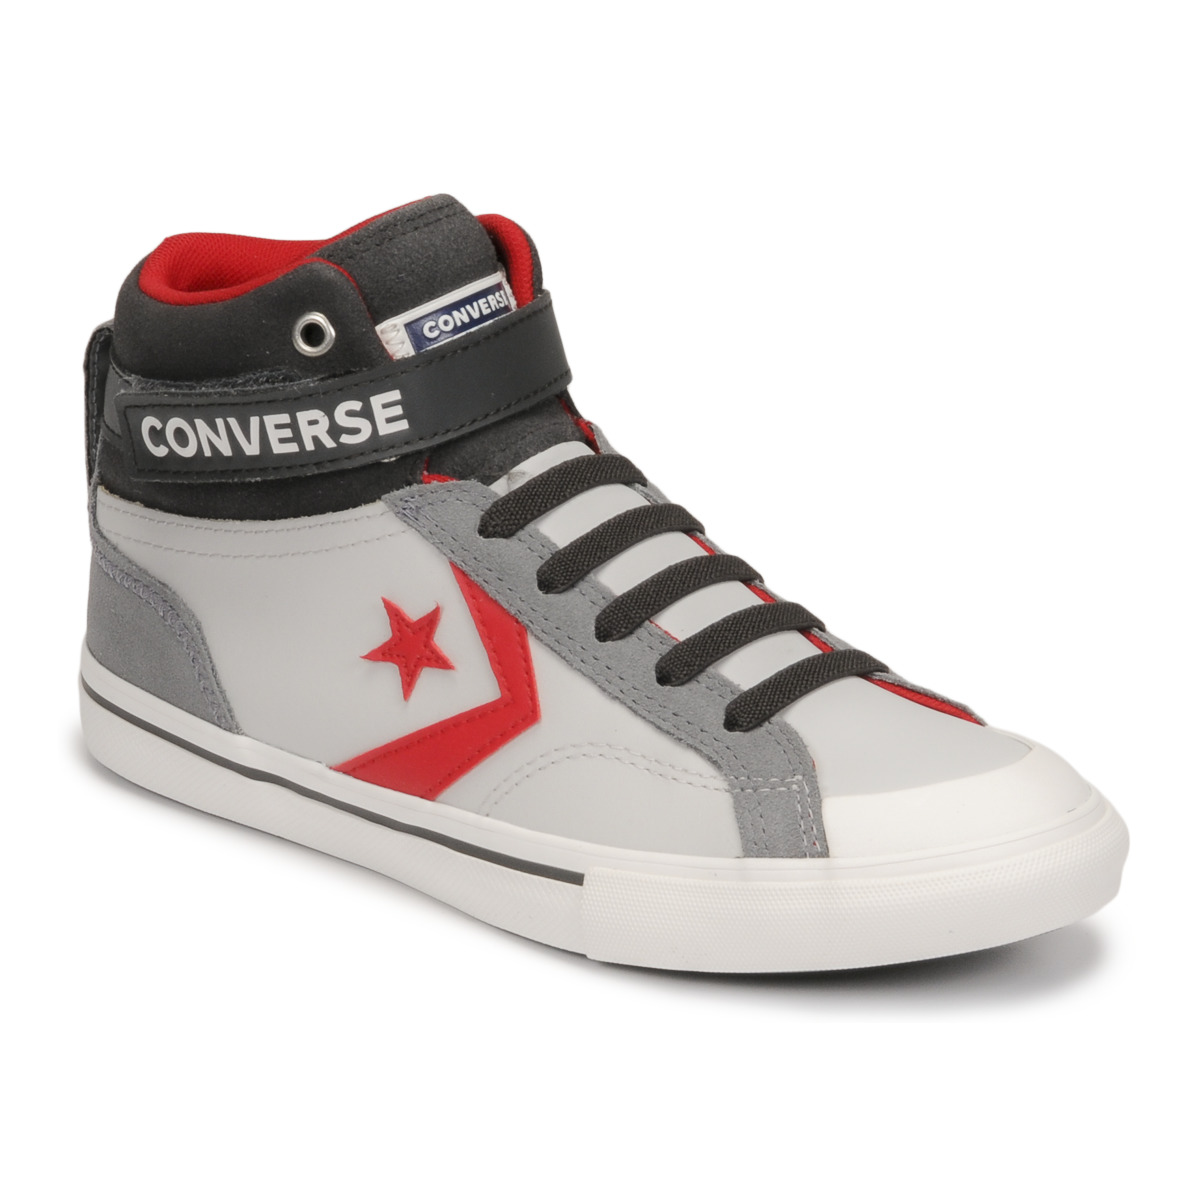 Converse PRO BLAZE Rubbersole.co.uk top £ TWIST - ! Grey - LEATHER Delivery Shoes Child STRAP trainers with Free Hi HI